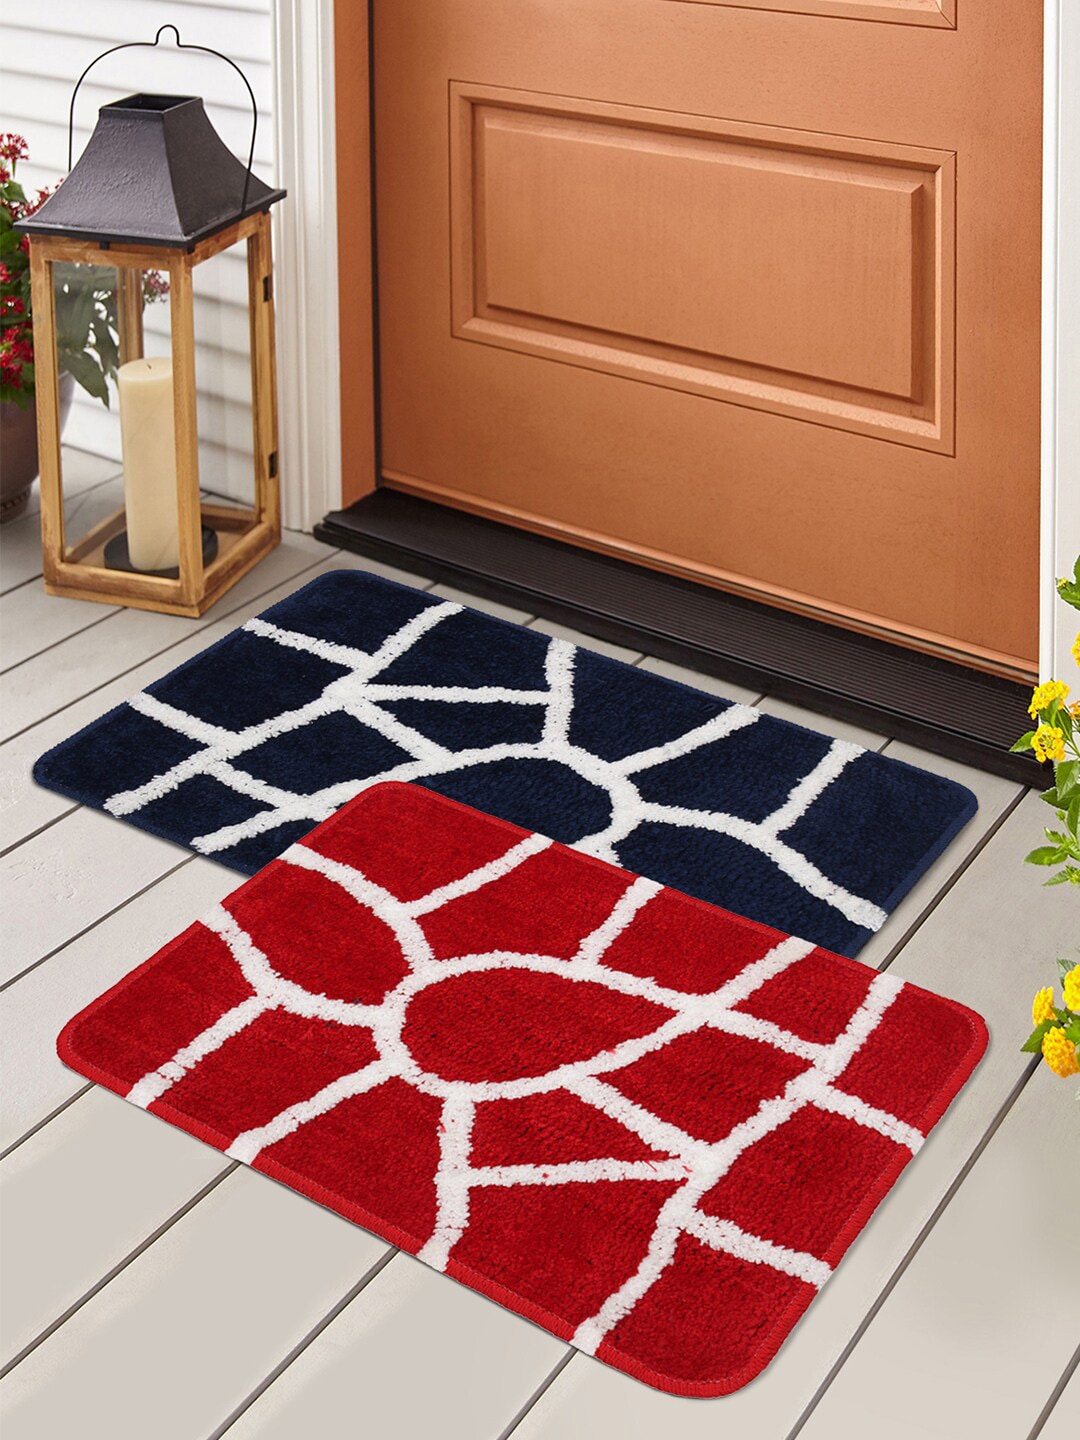 Story@home Set Of 2 Printed Anti-Skid Eco-Friendly Doormats Price in India